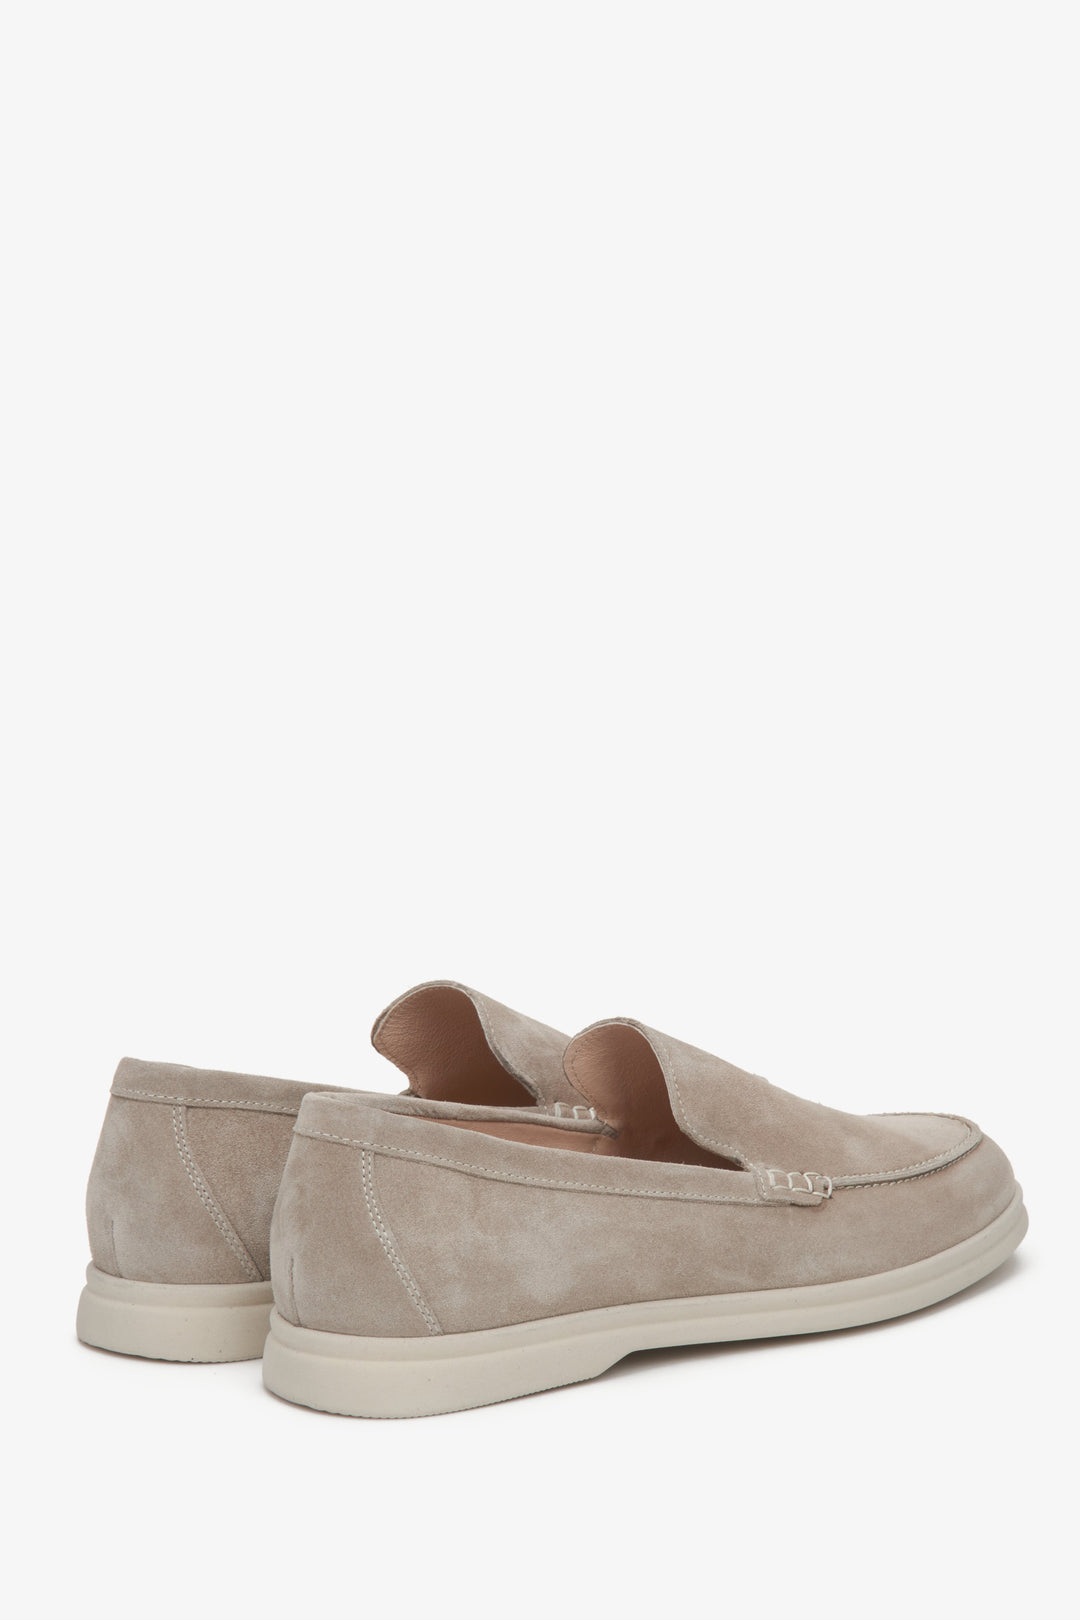 Estro men's natural velvet moccasins in beige - close-up of the heel and sideline of the shoes.